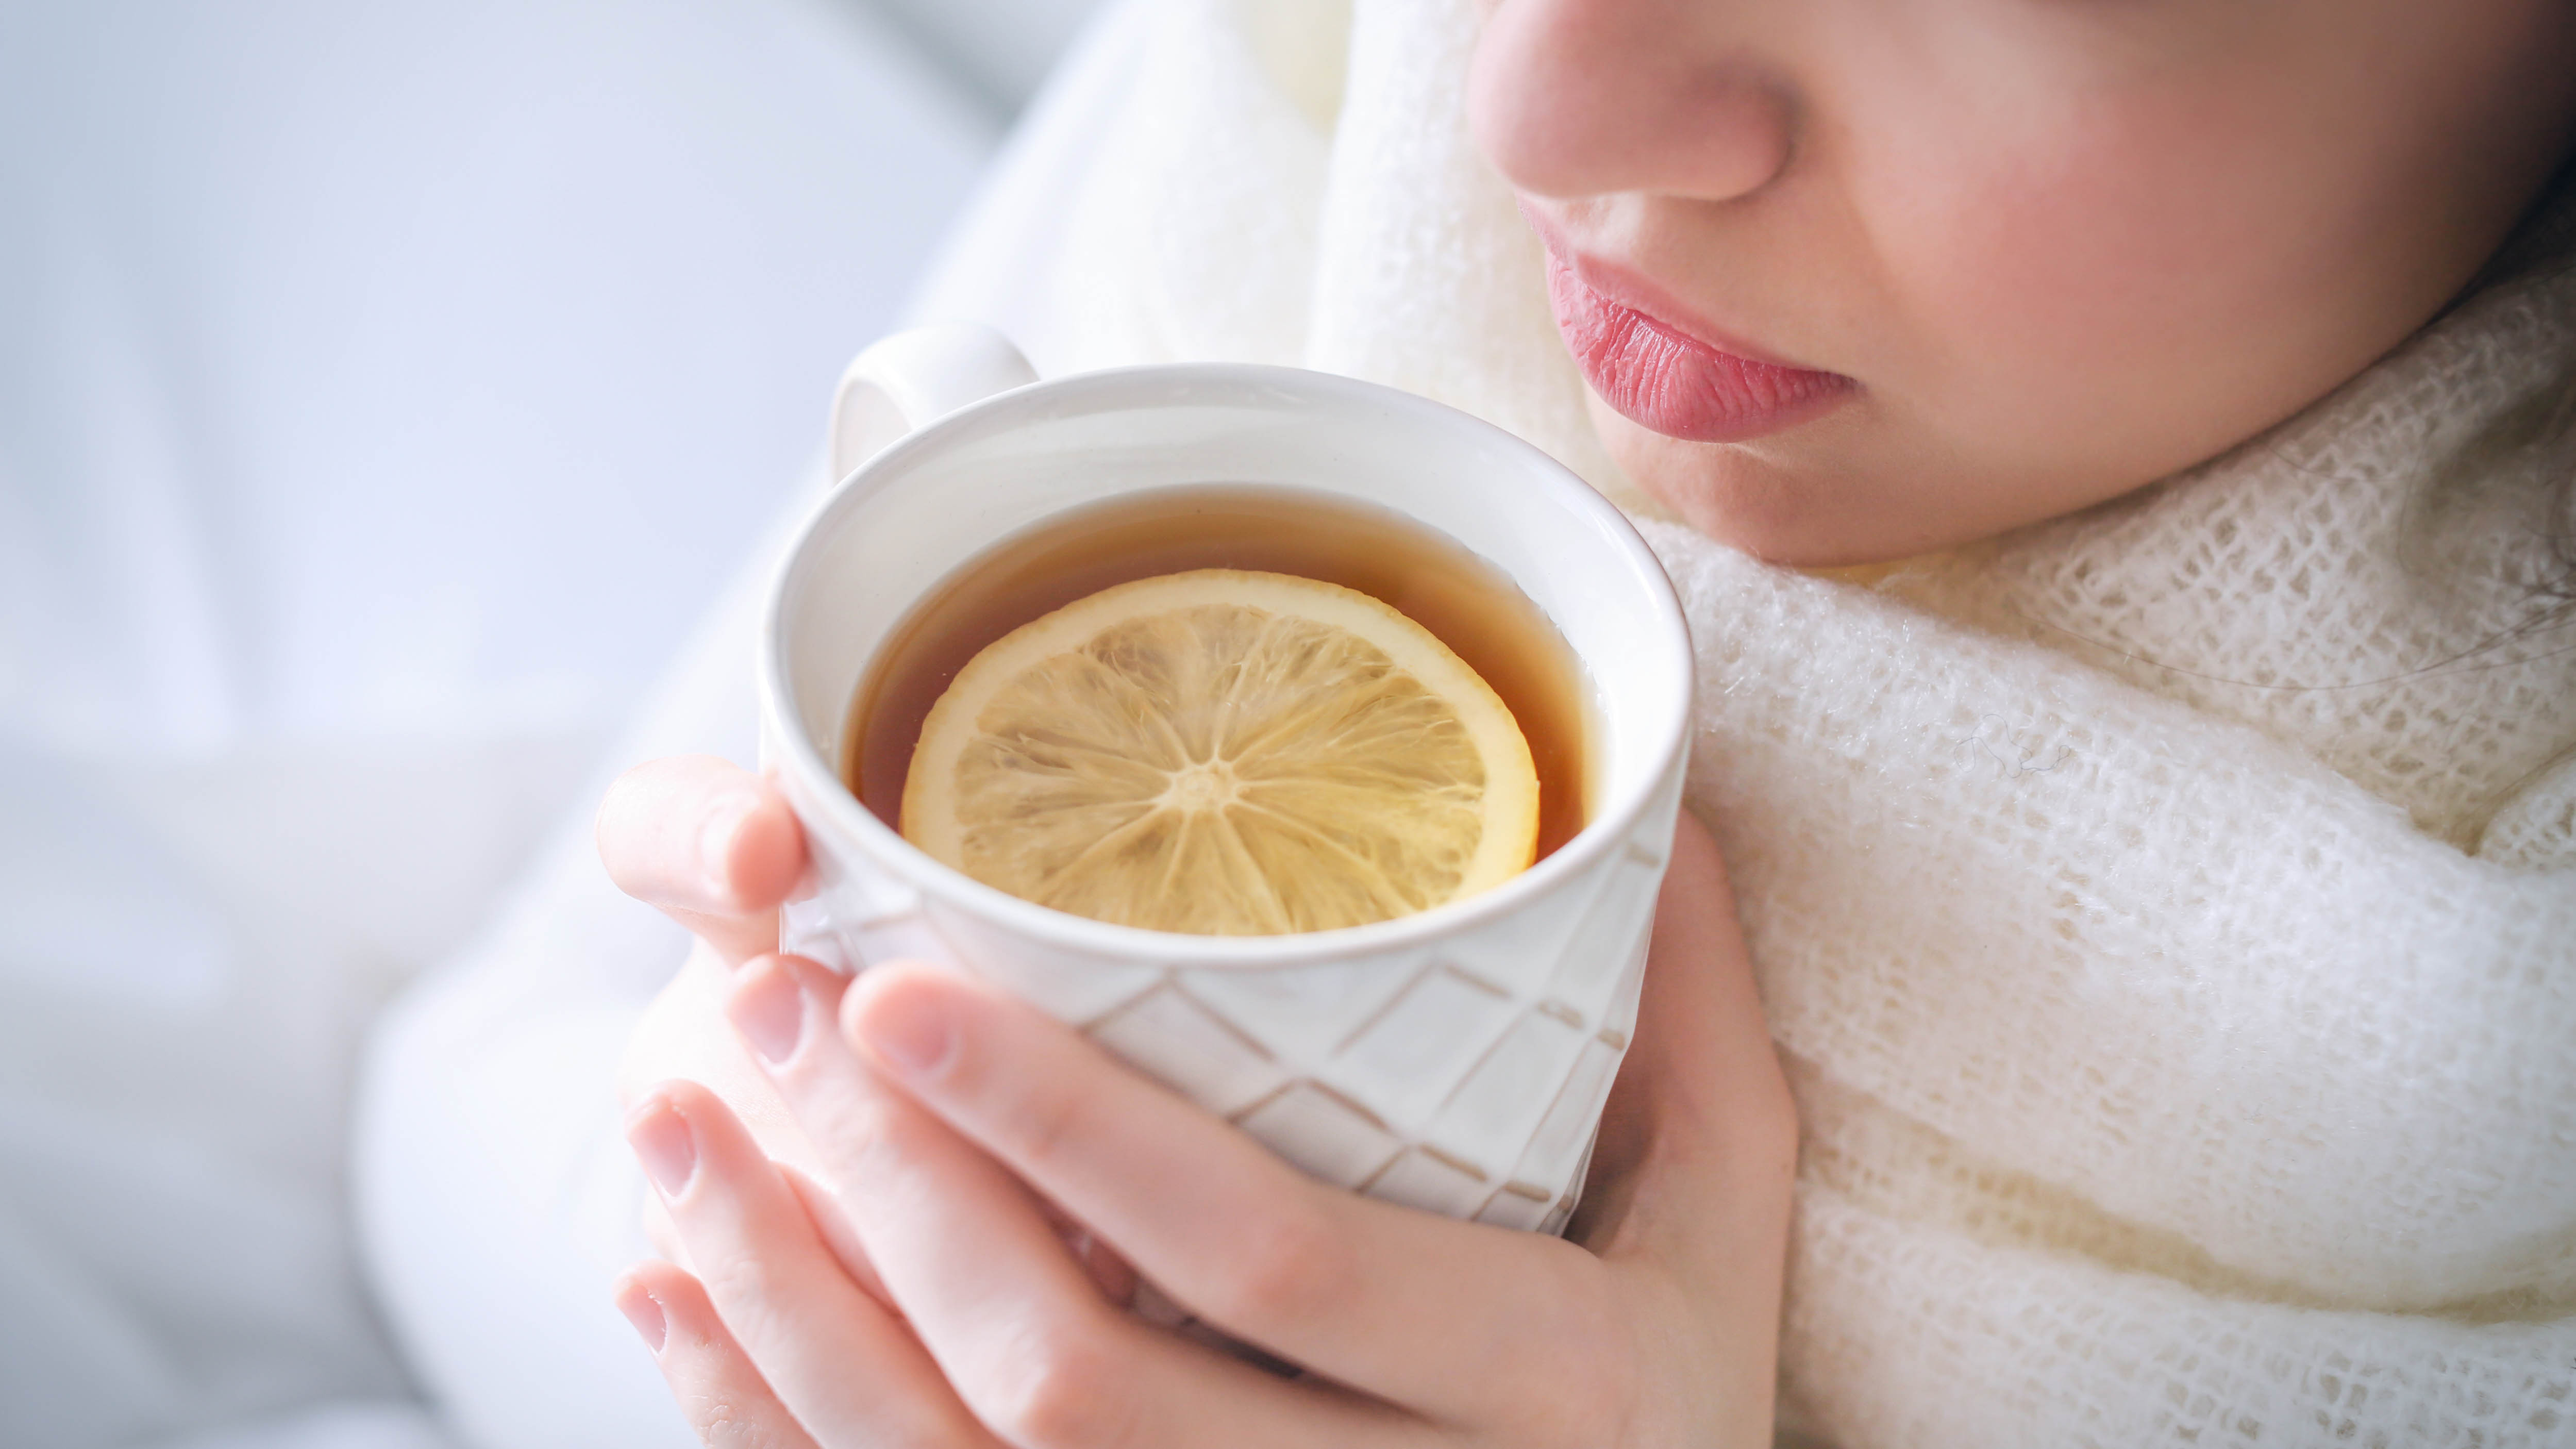 A person holding a cup of tea with a slice of lemon inside